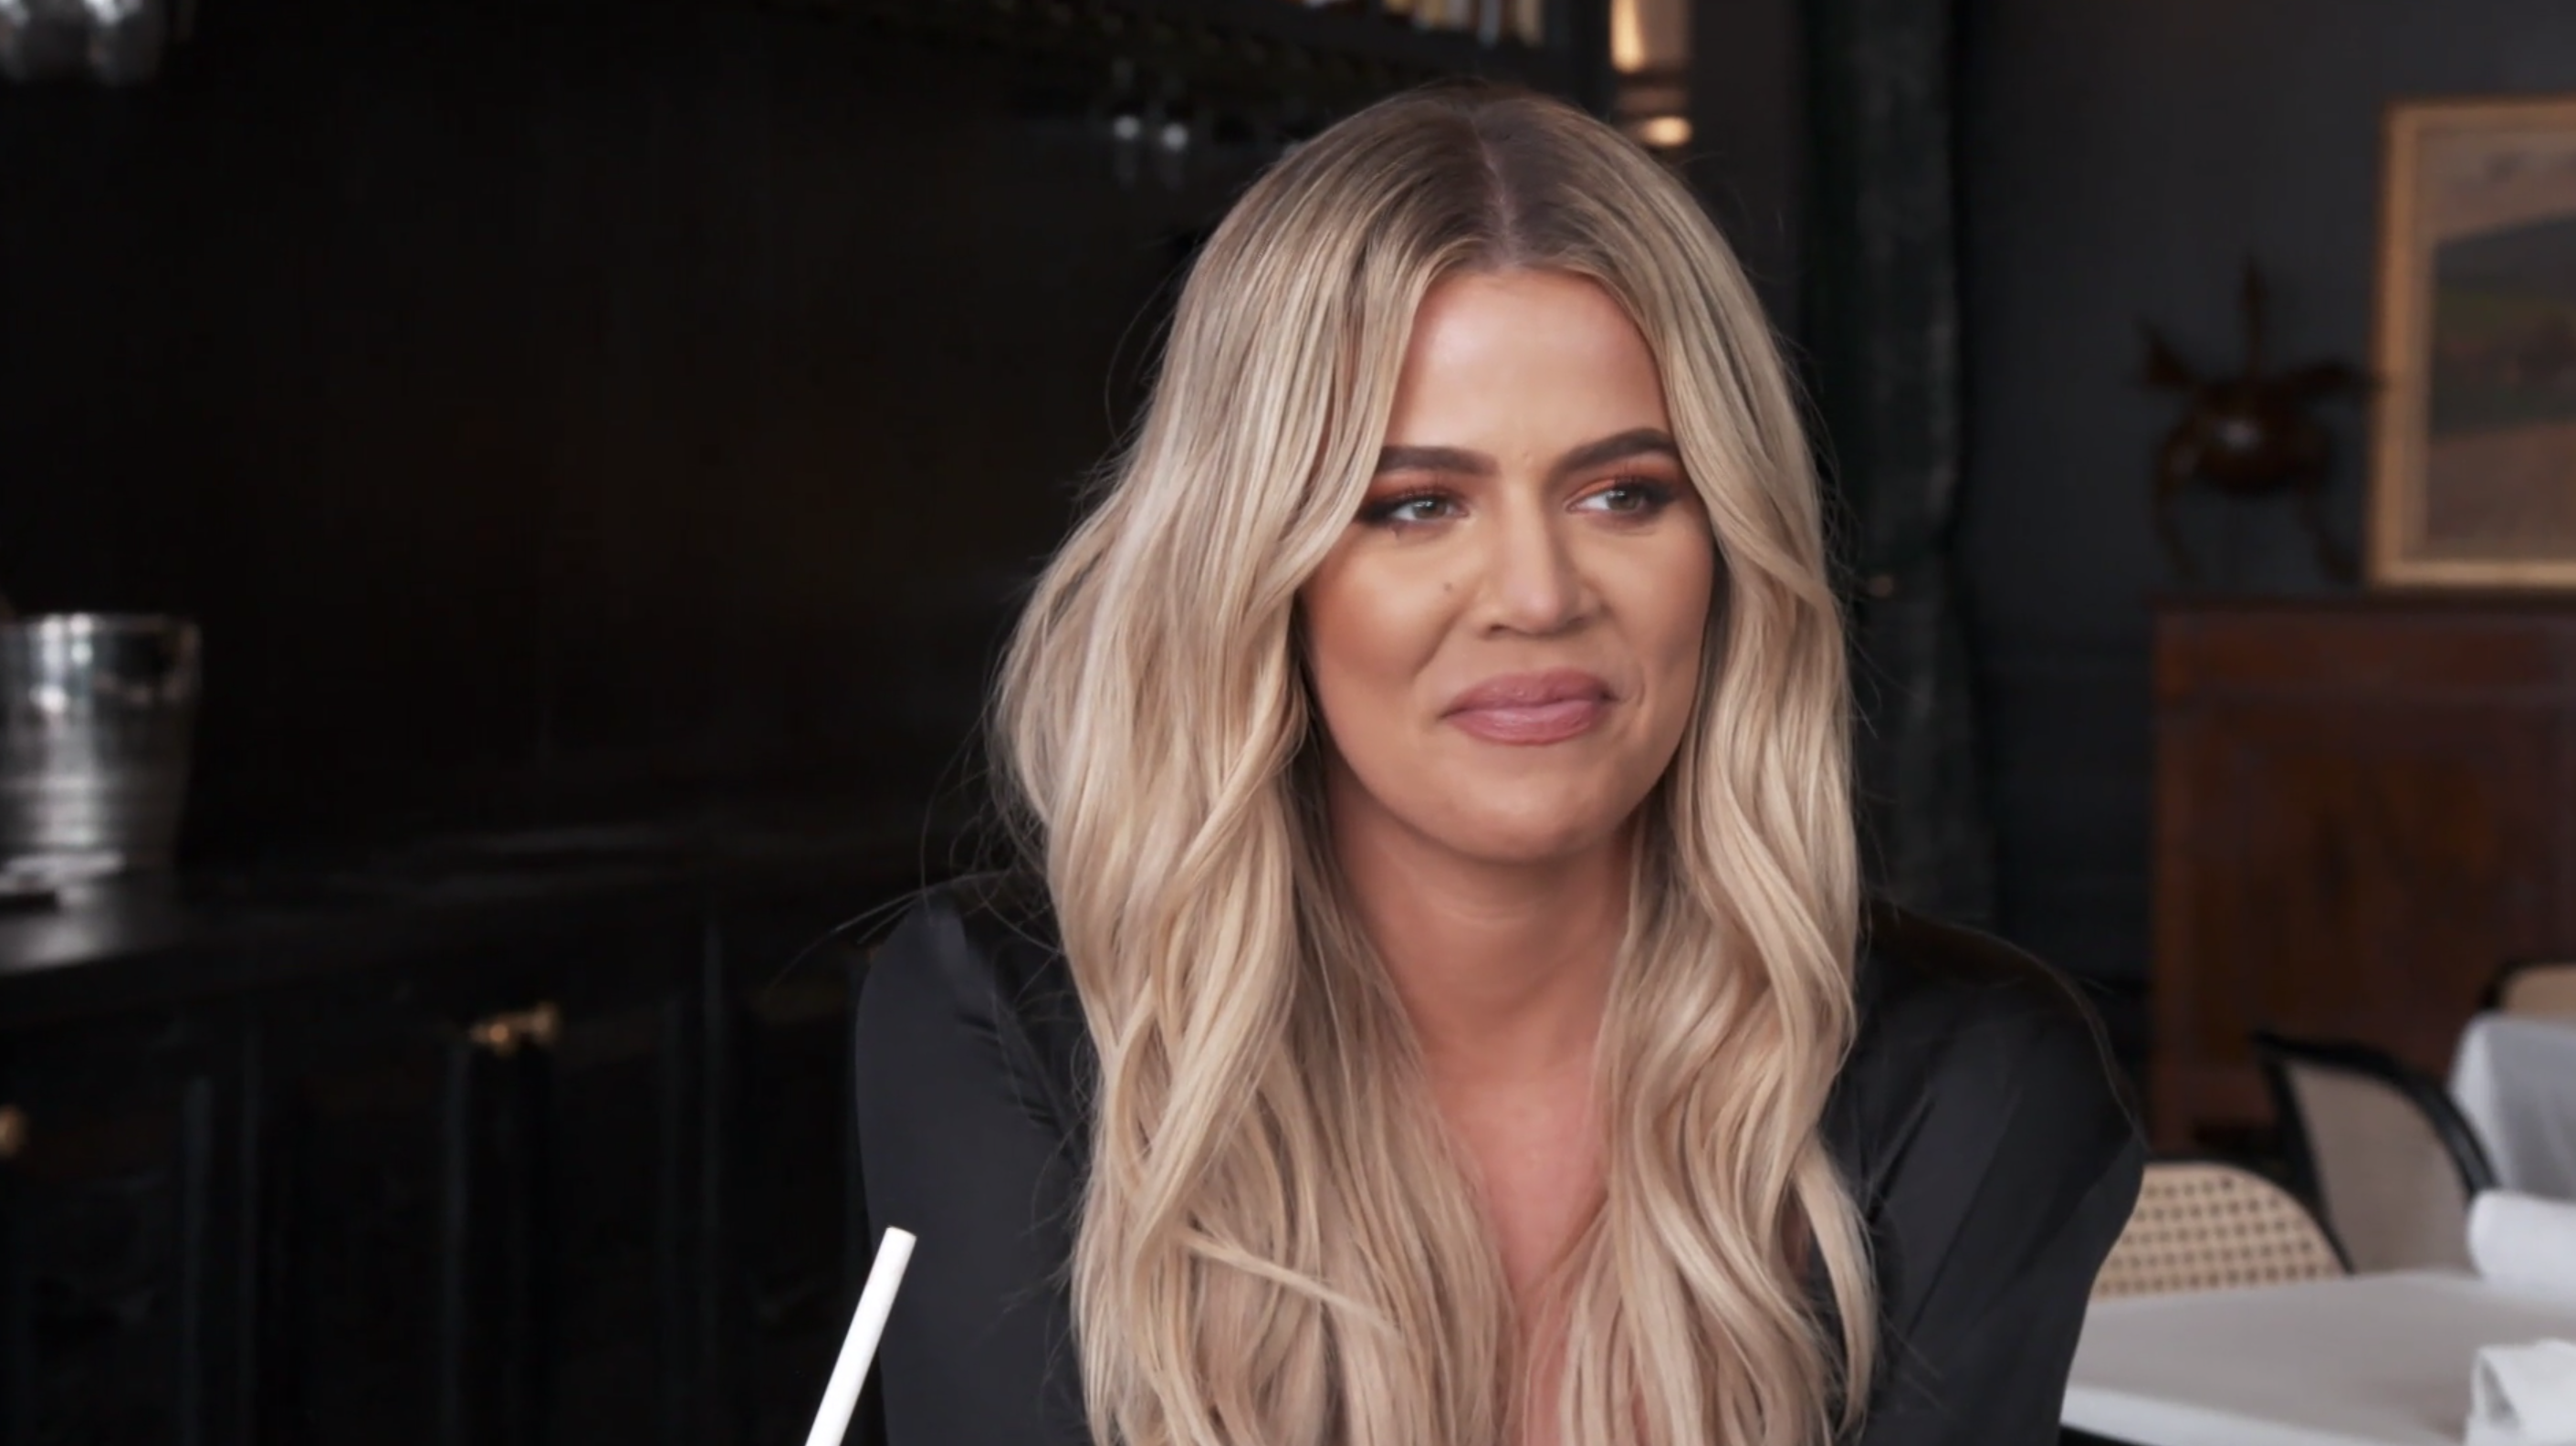 Khloe Kardashian's wrist tattoo meaning: Is it for Tristan Thompson? When did she get it?